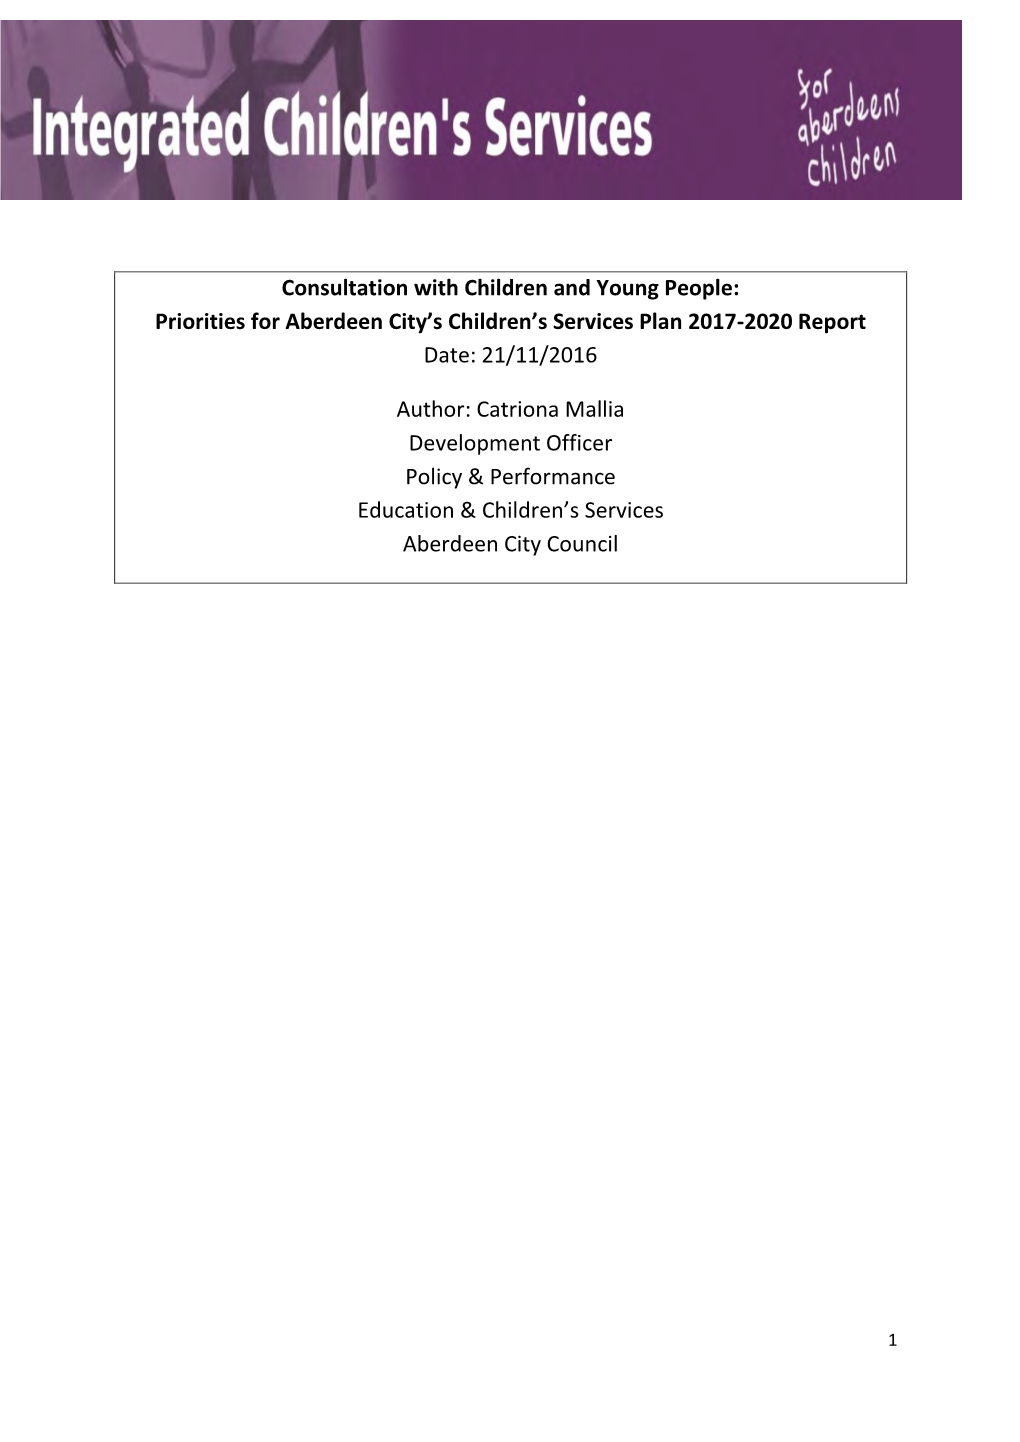 Consultation with C&YP: Priorities for Aberdeen City's Children's Services